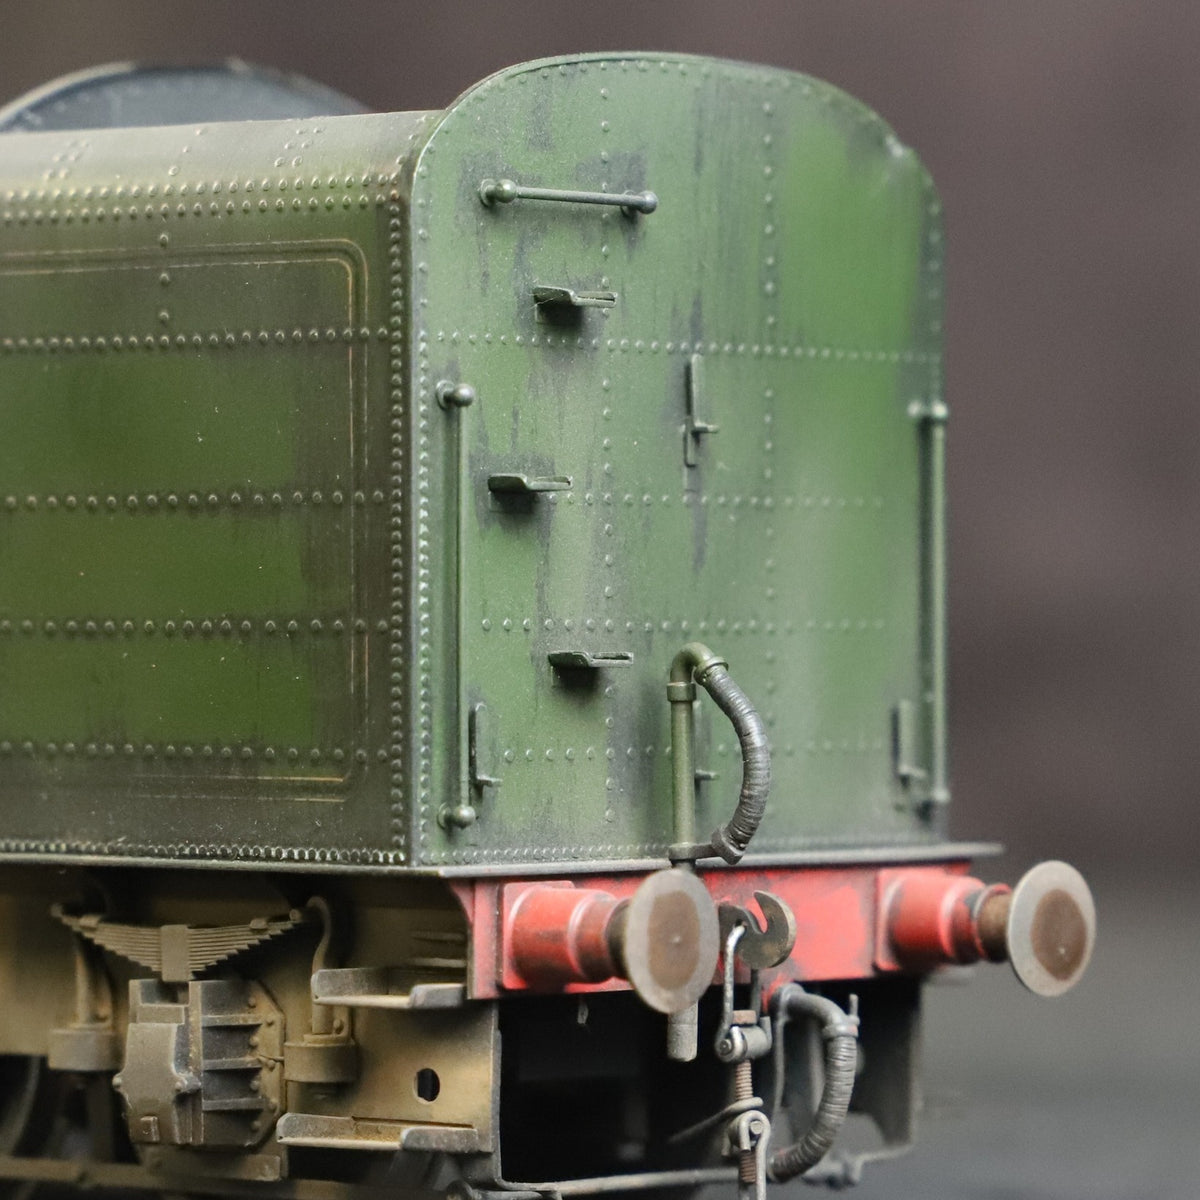 Weathering and Customisation by Neil Armitage